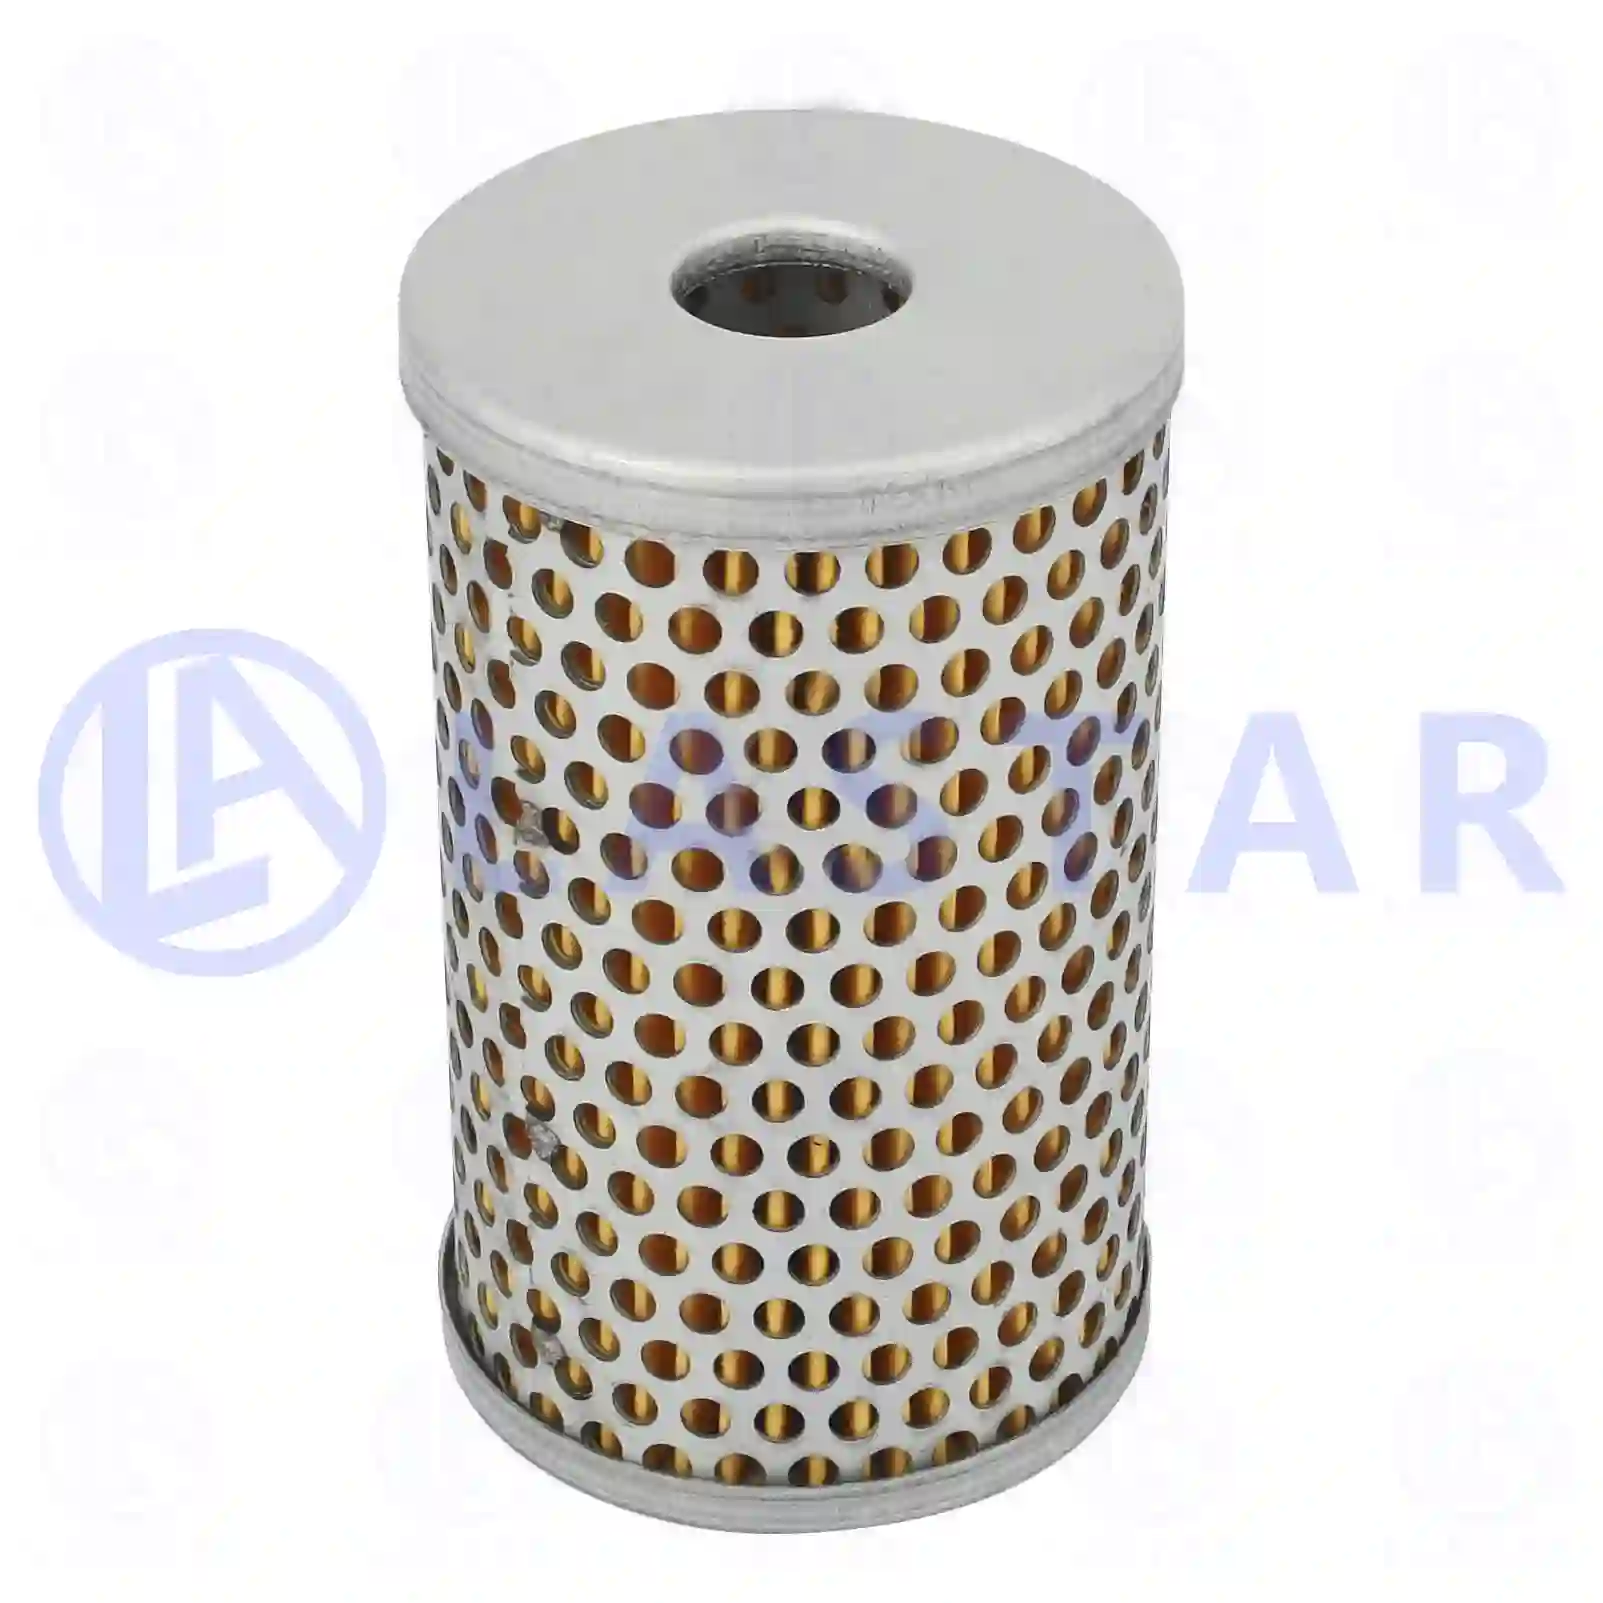  Oil filter insert || Lastar Spare Part | Truck Spare Parts, Auotomotive Spare Parts